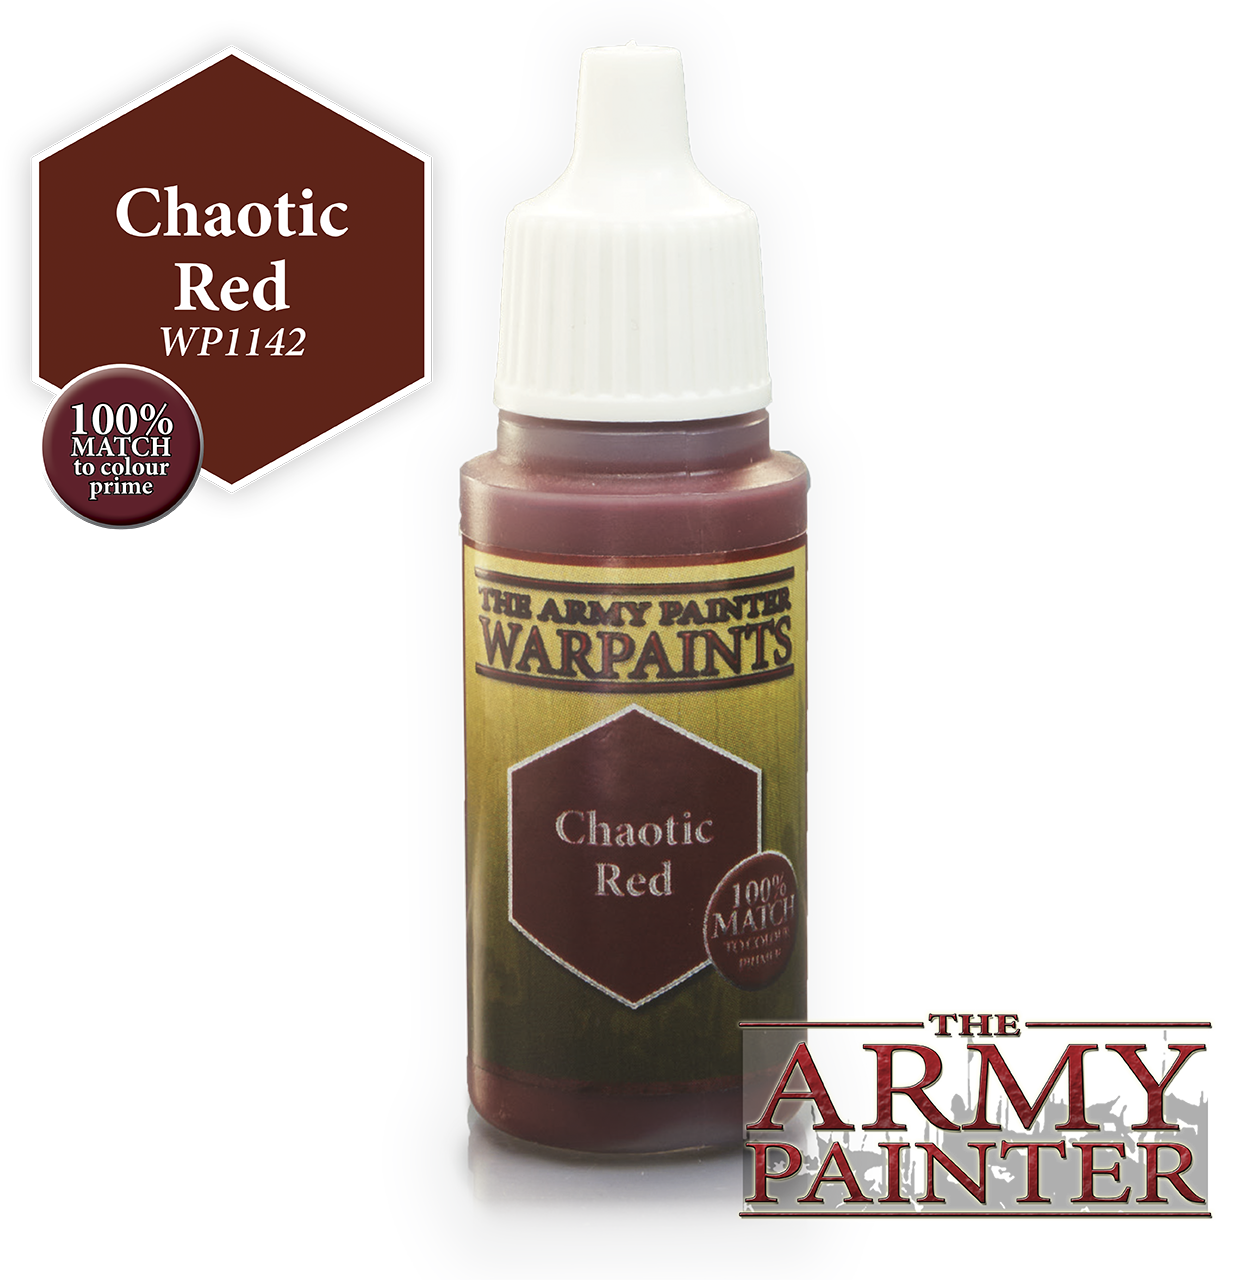 *The Army Painter* Chaotic Red Warpaint 